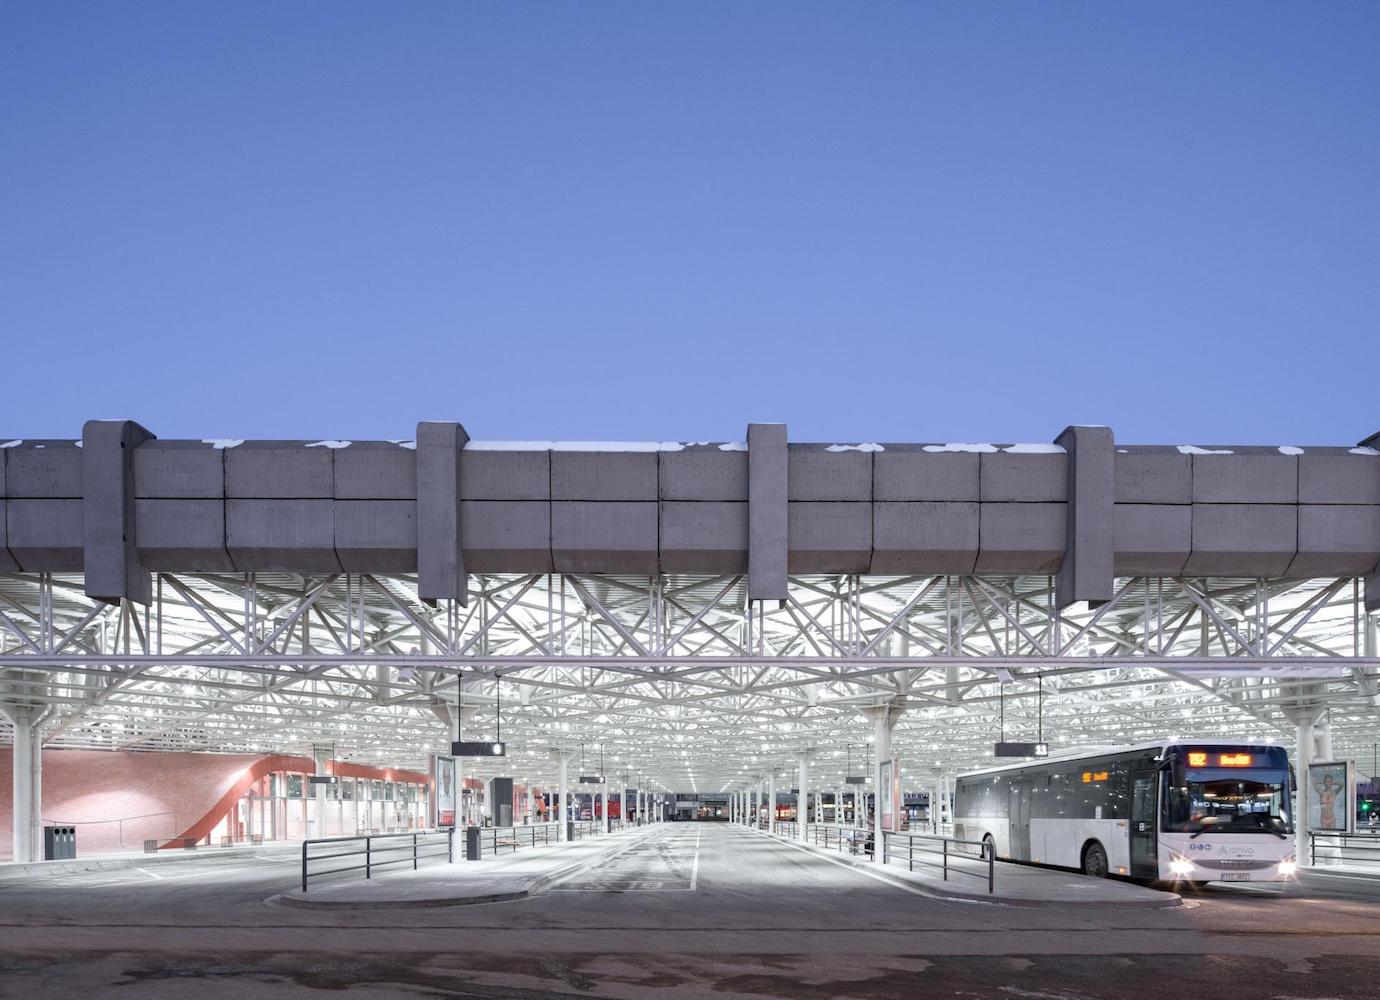 Brno’s brutalist bus station reopens for new journeys | Concrete Ideas